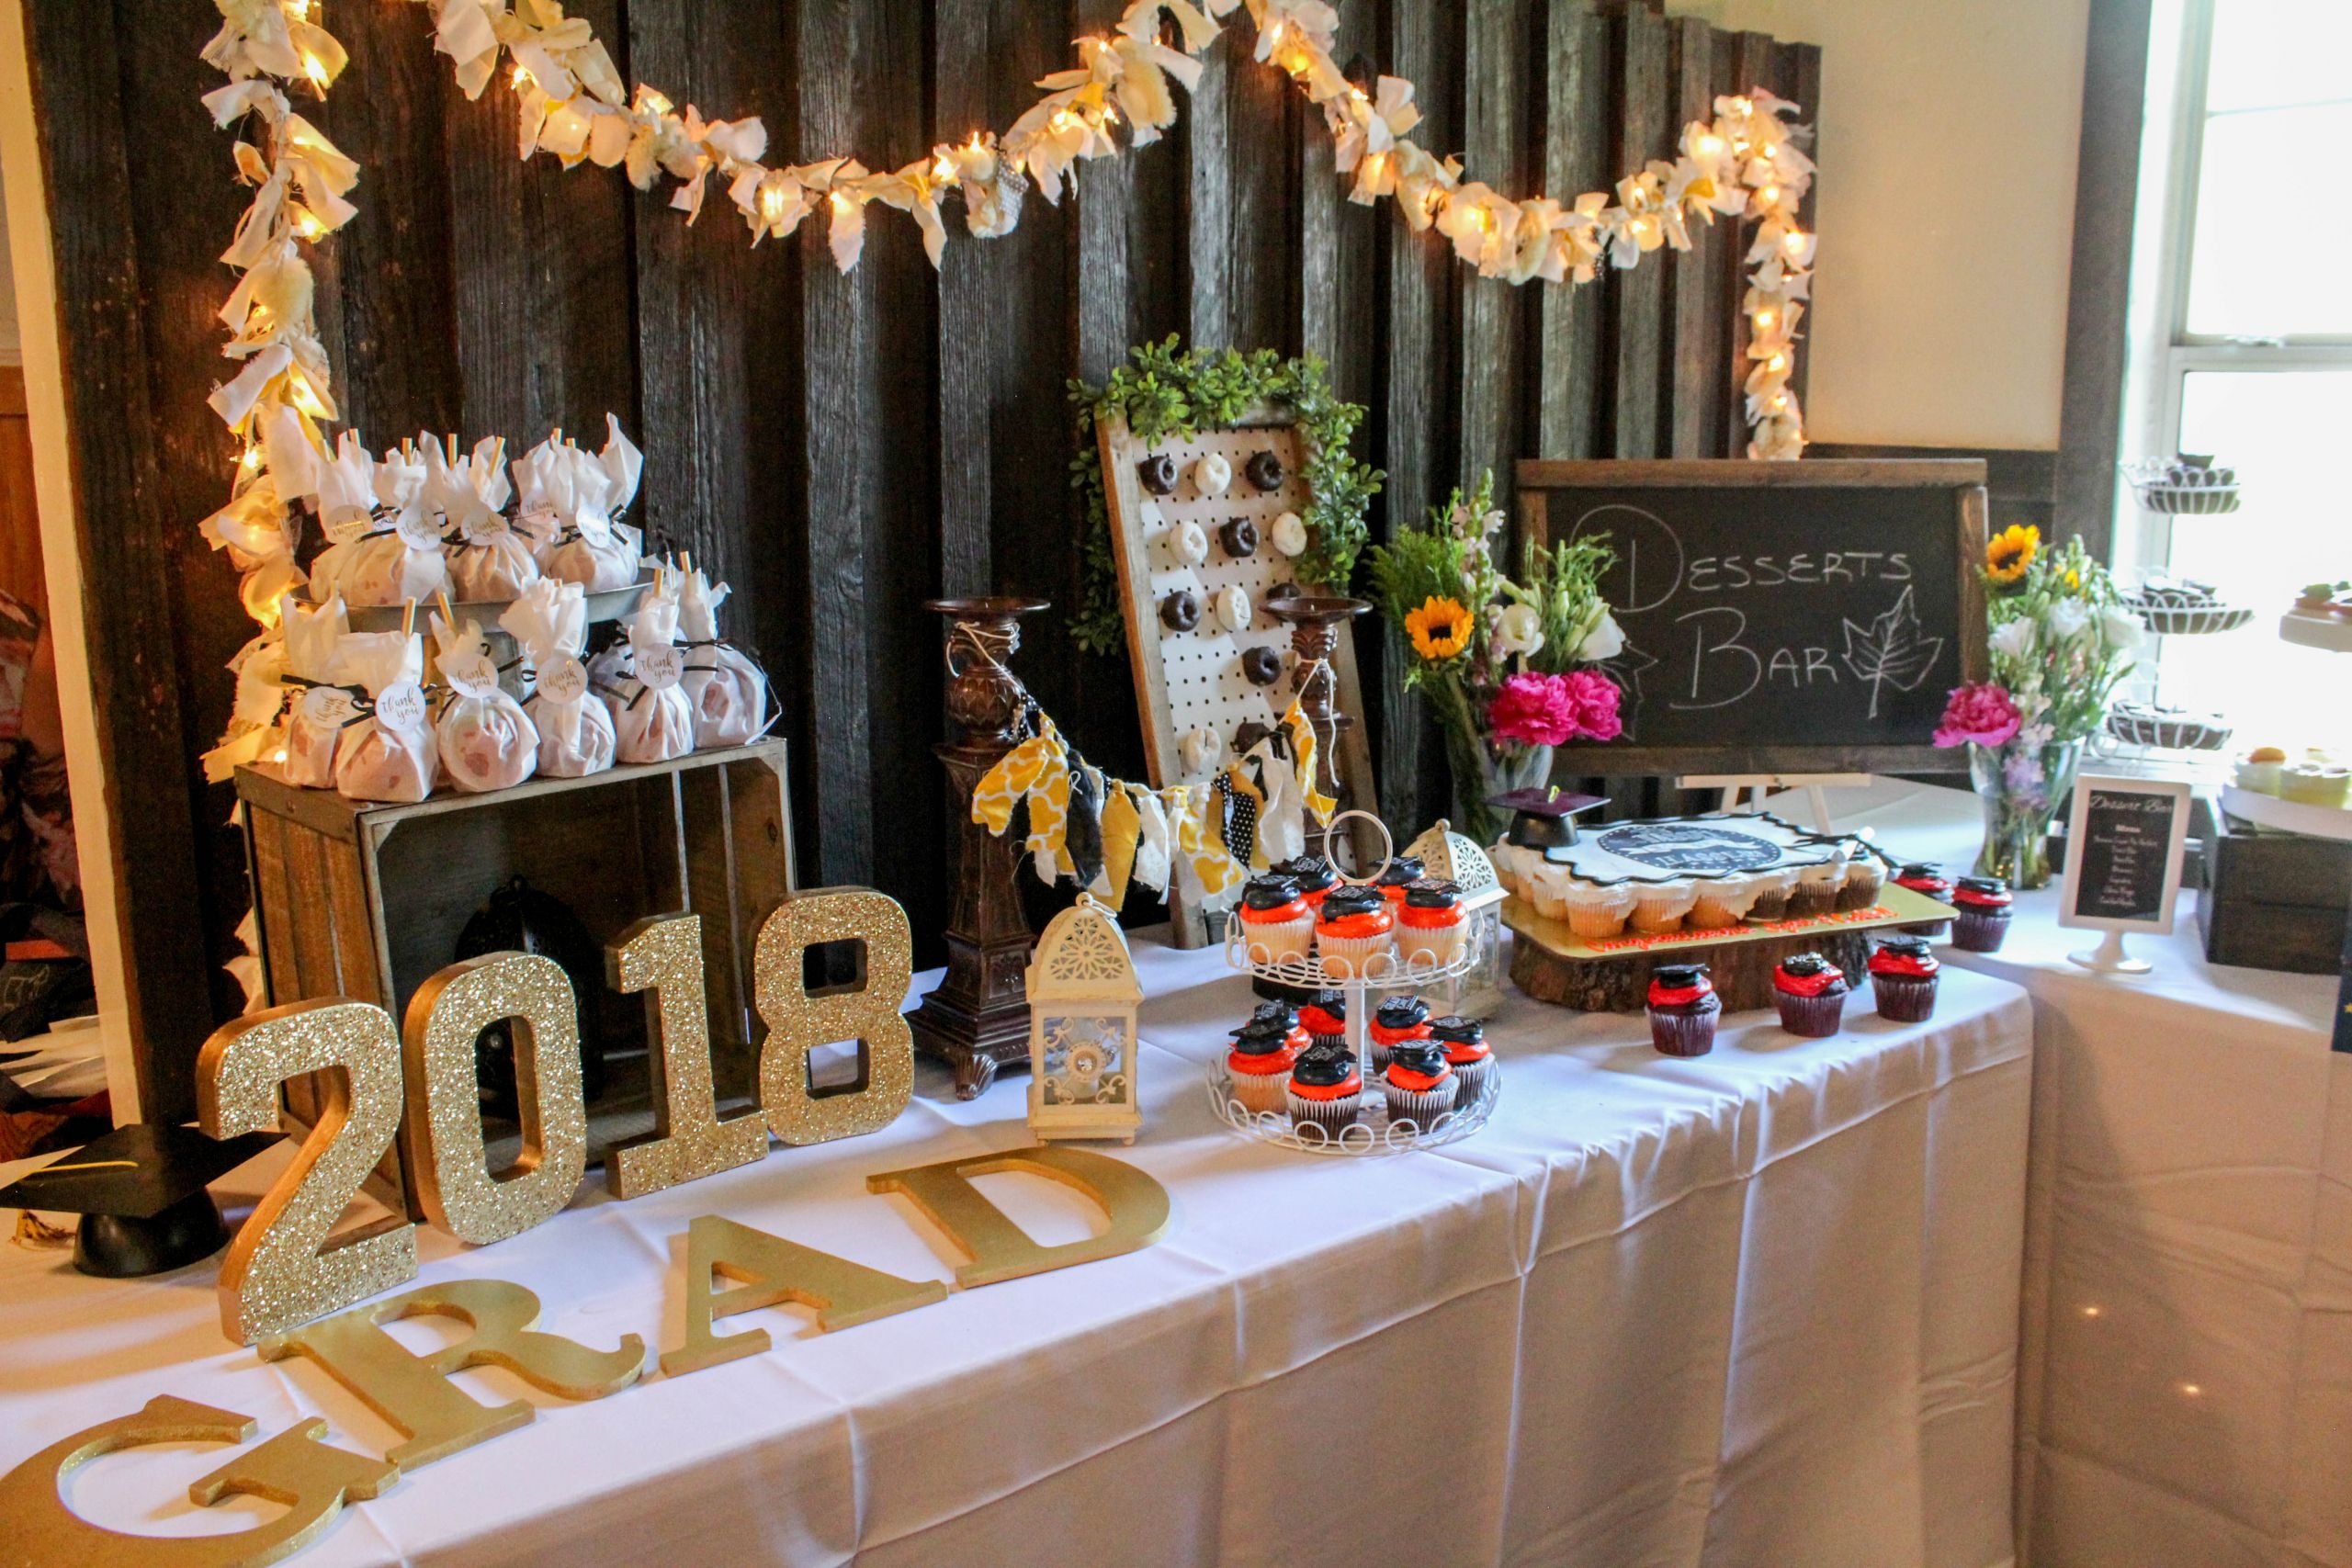 Buffet Ideas For Graduation Party
 Graduation Party Ideas addicted to recipes